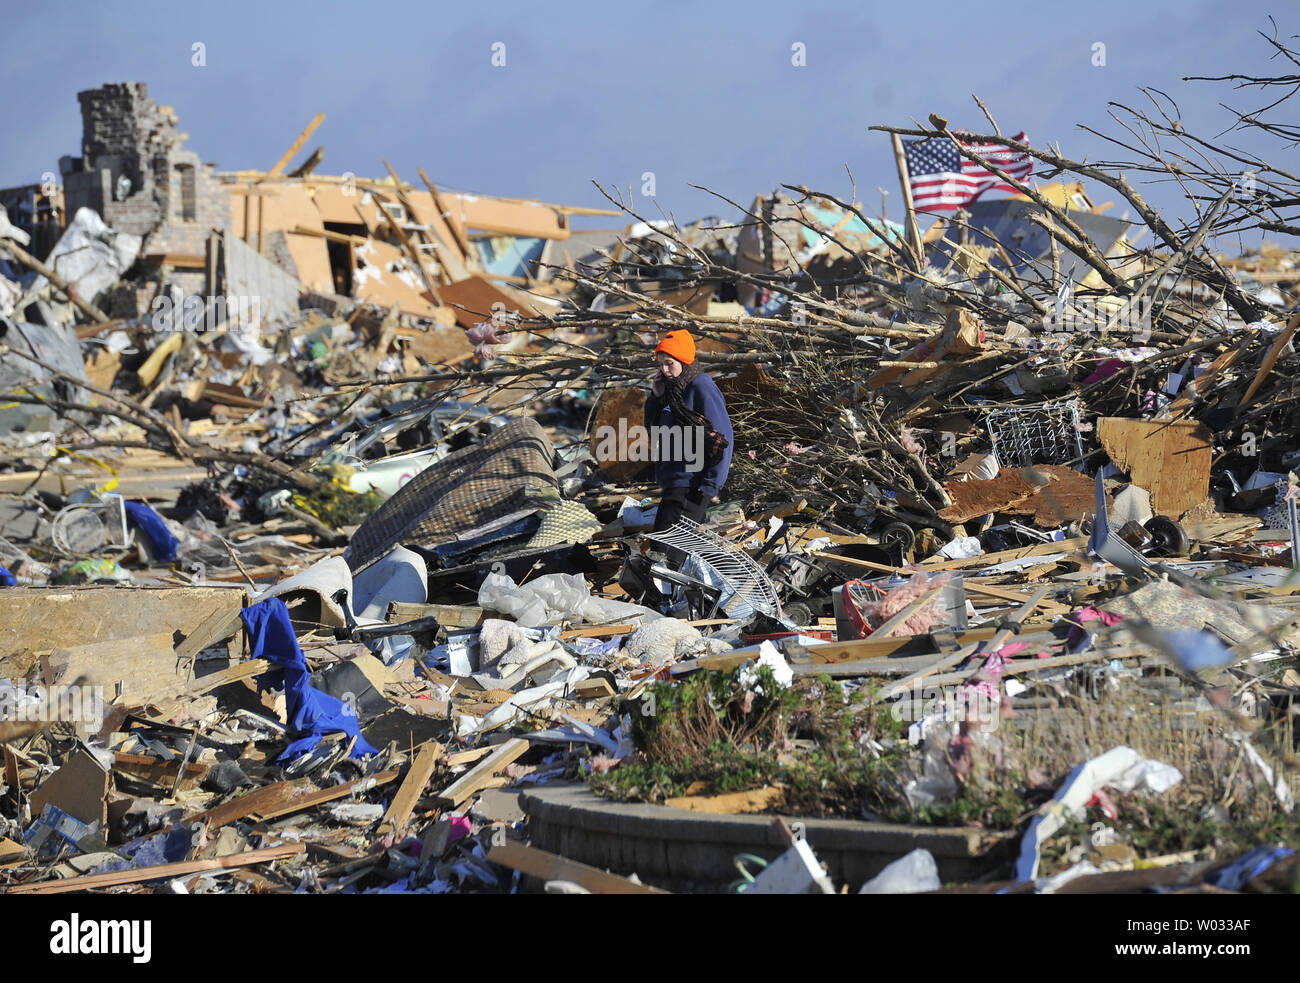 Nicole Janardhan looks for her belongings among the debris of her neighborhood in Washington, Illinois on November 18, 2013. Six people died and hundreds of homes were destroyed in Illinois as 81 tornadoes were sighted on November 17 throughout 12 midwest states including the EF4 tornado that struck Washington, Illinois.     UPI/Brian Kersey.     UPI/Brian Kersey Stock Photo